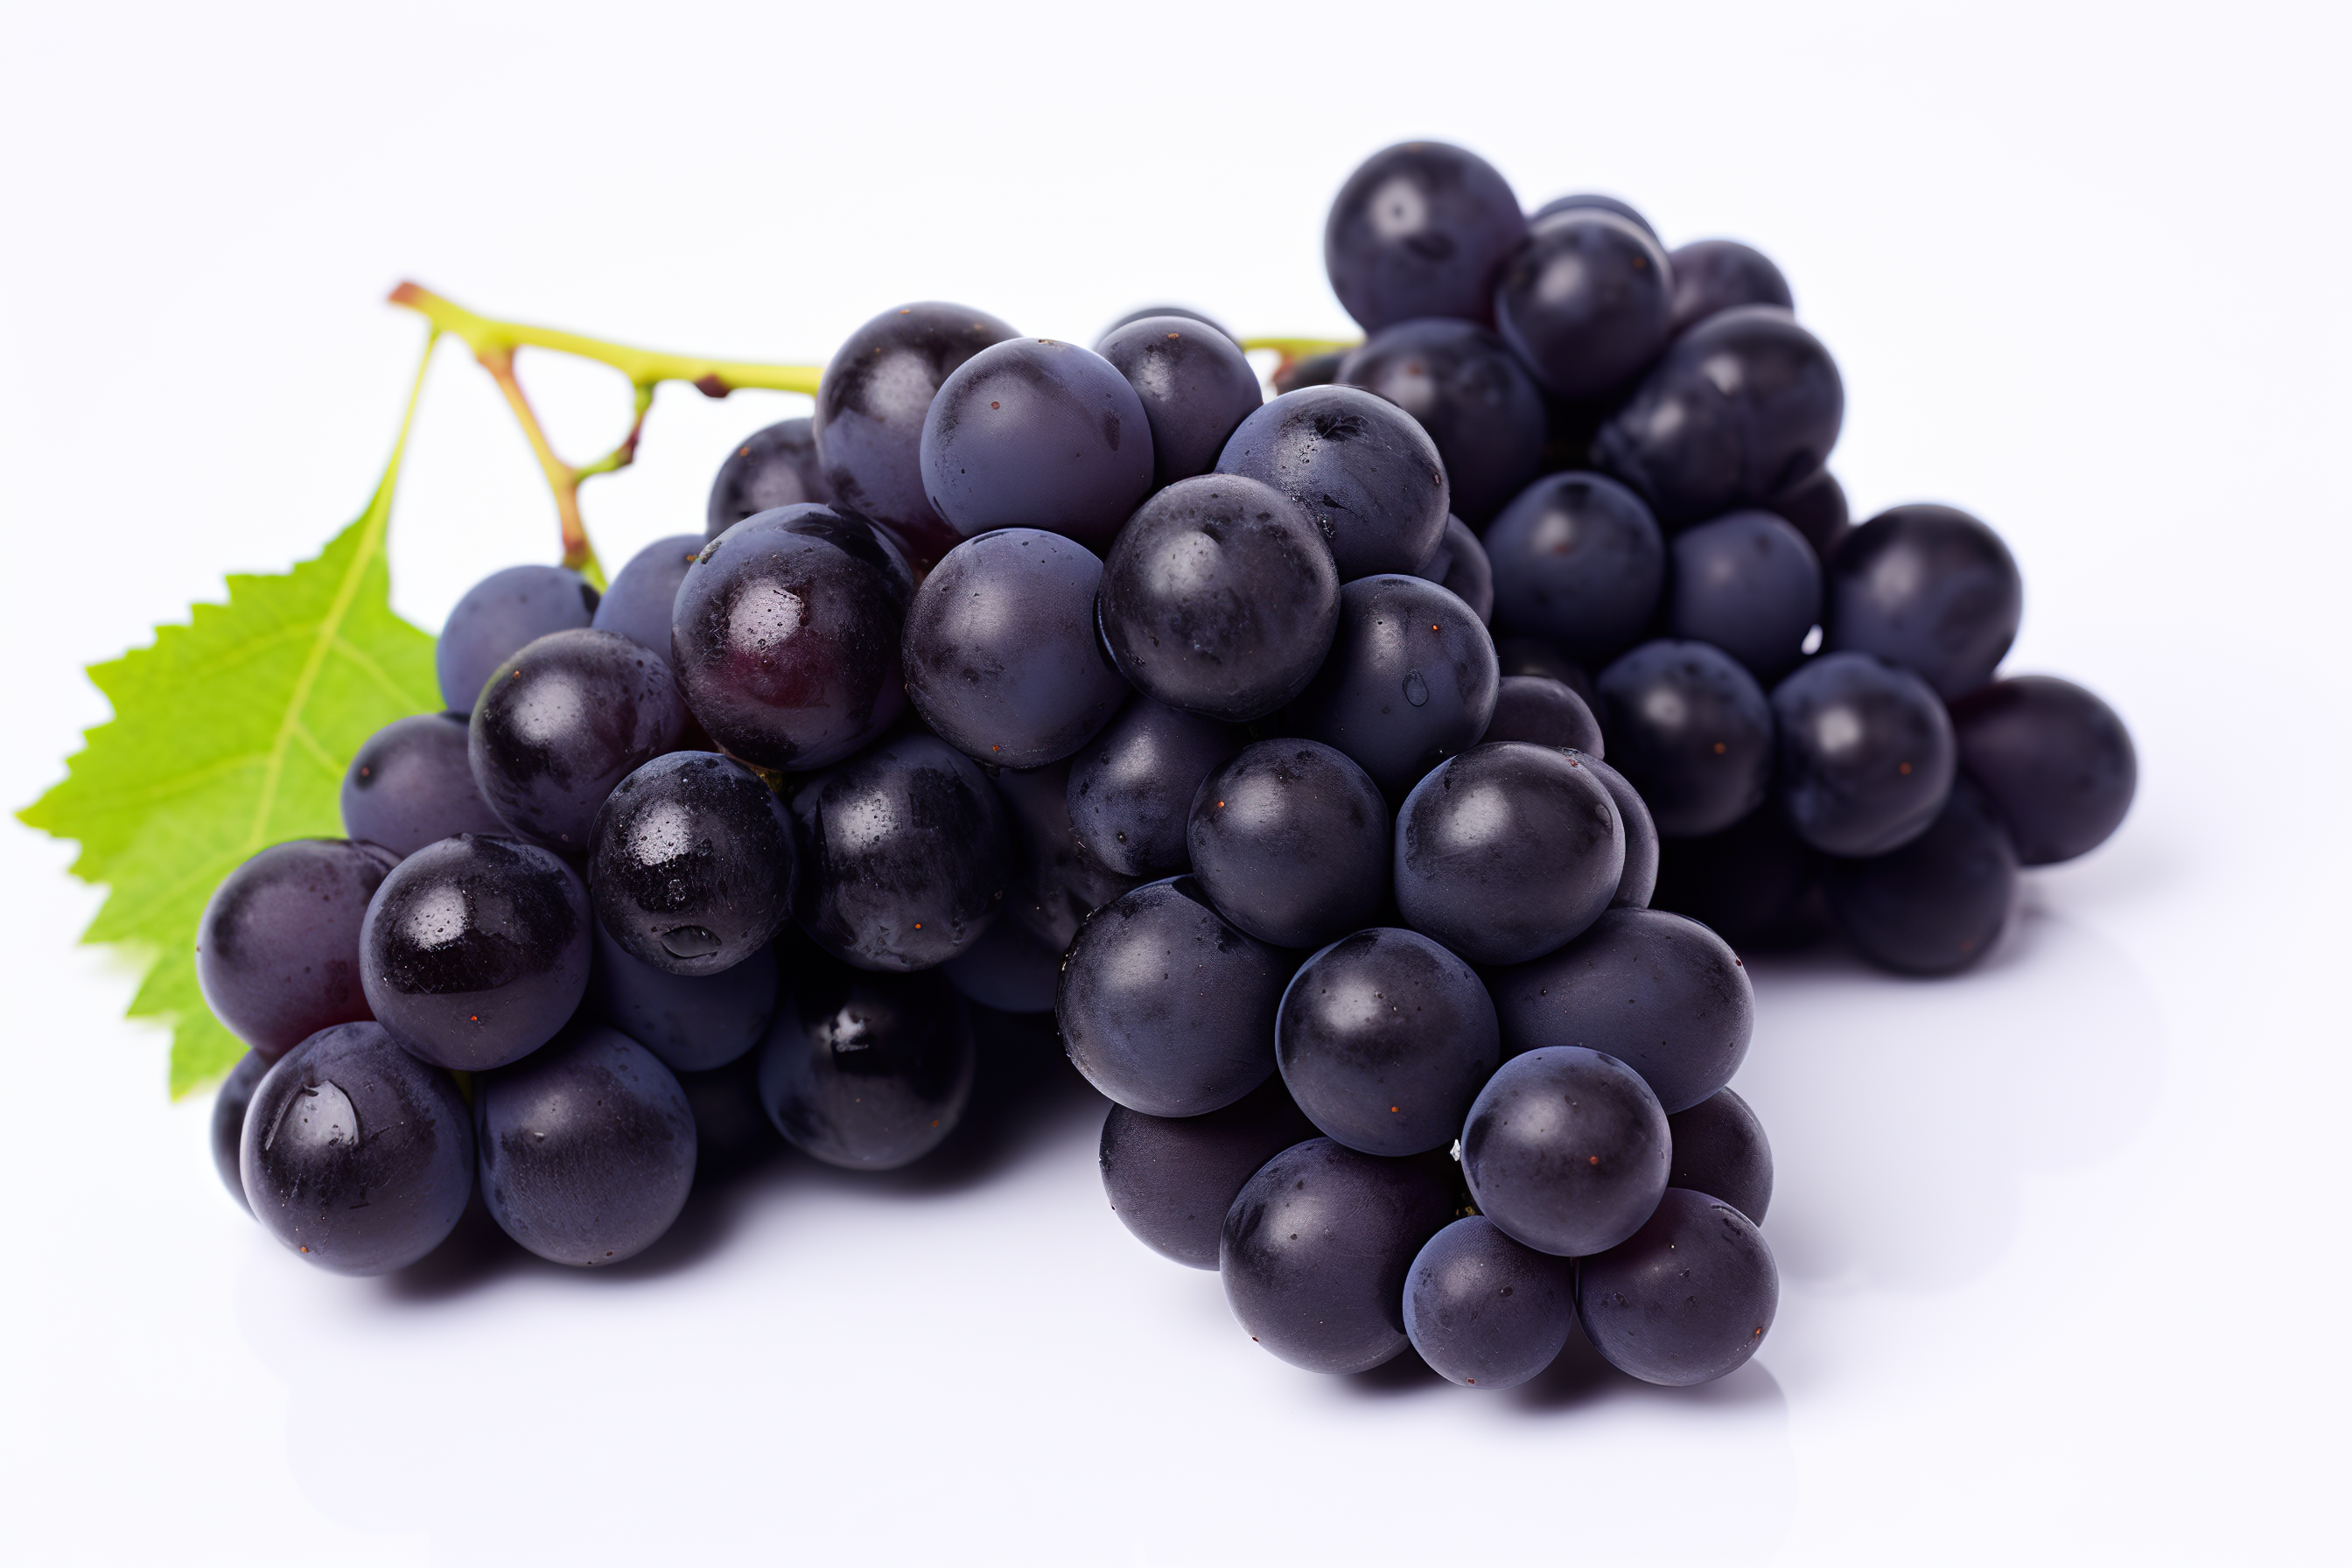 Purple grapes with green leaves, isolated on white background